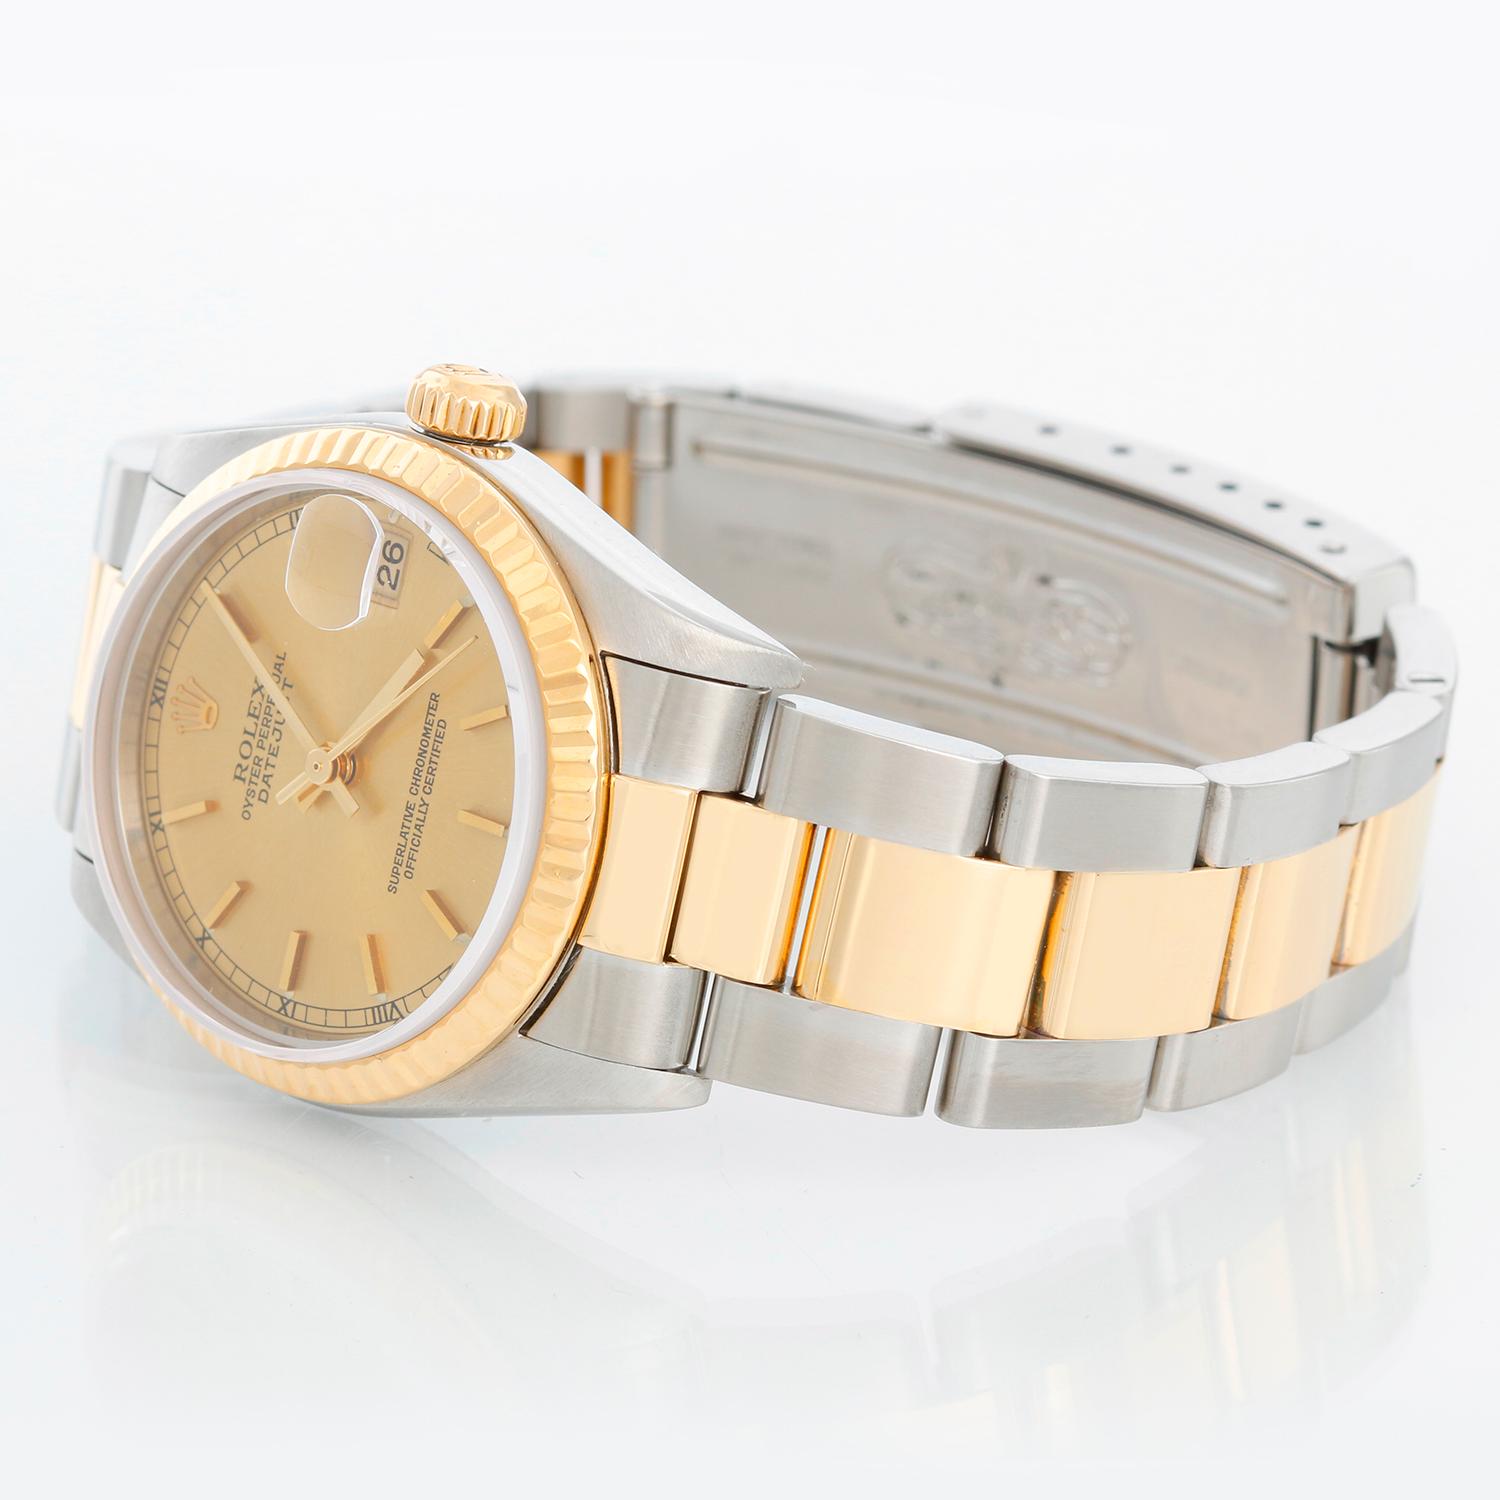 Rolex Datejust Midsize 2-Tone Men's or Ladies Watch 78273 - Automatic winding, 31 jewels, Quickset, sapphire crystal. Stainless steel case with yellow gold fluted bezel ( 31 mm ) . Champagne dial with stick hour markers. Stainless steel and 18k